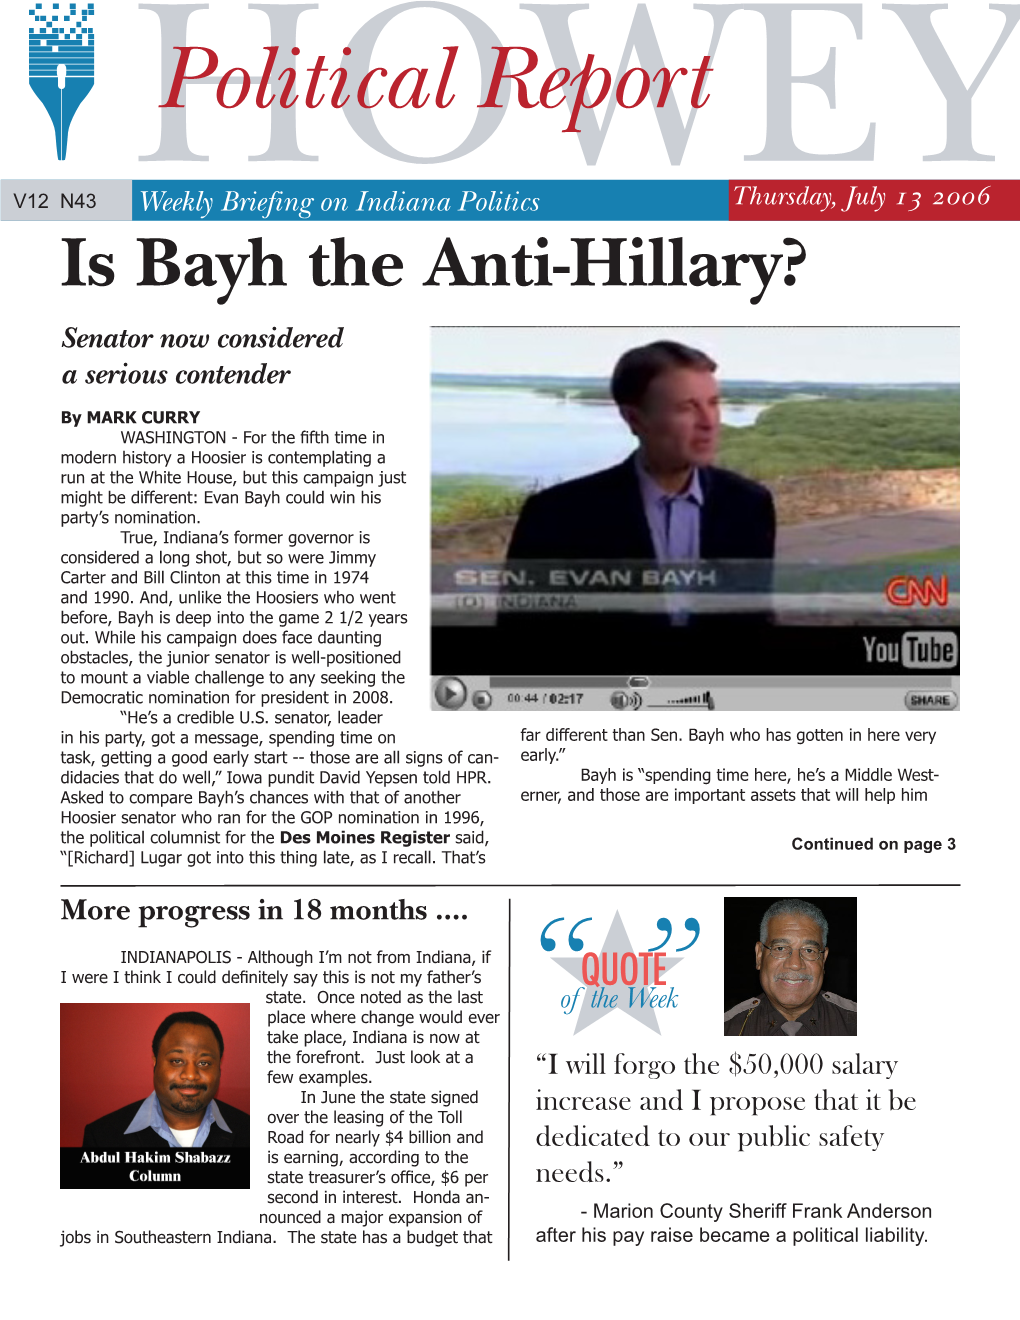 Is Bayh the Anti-Hillary? Senator Now Considered a Serious Contender